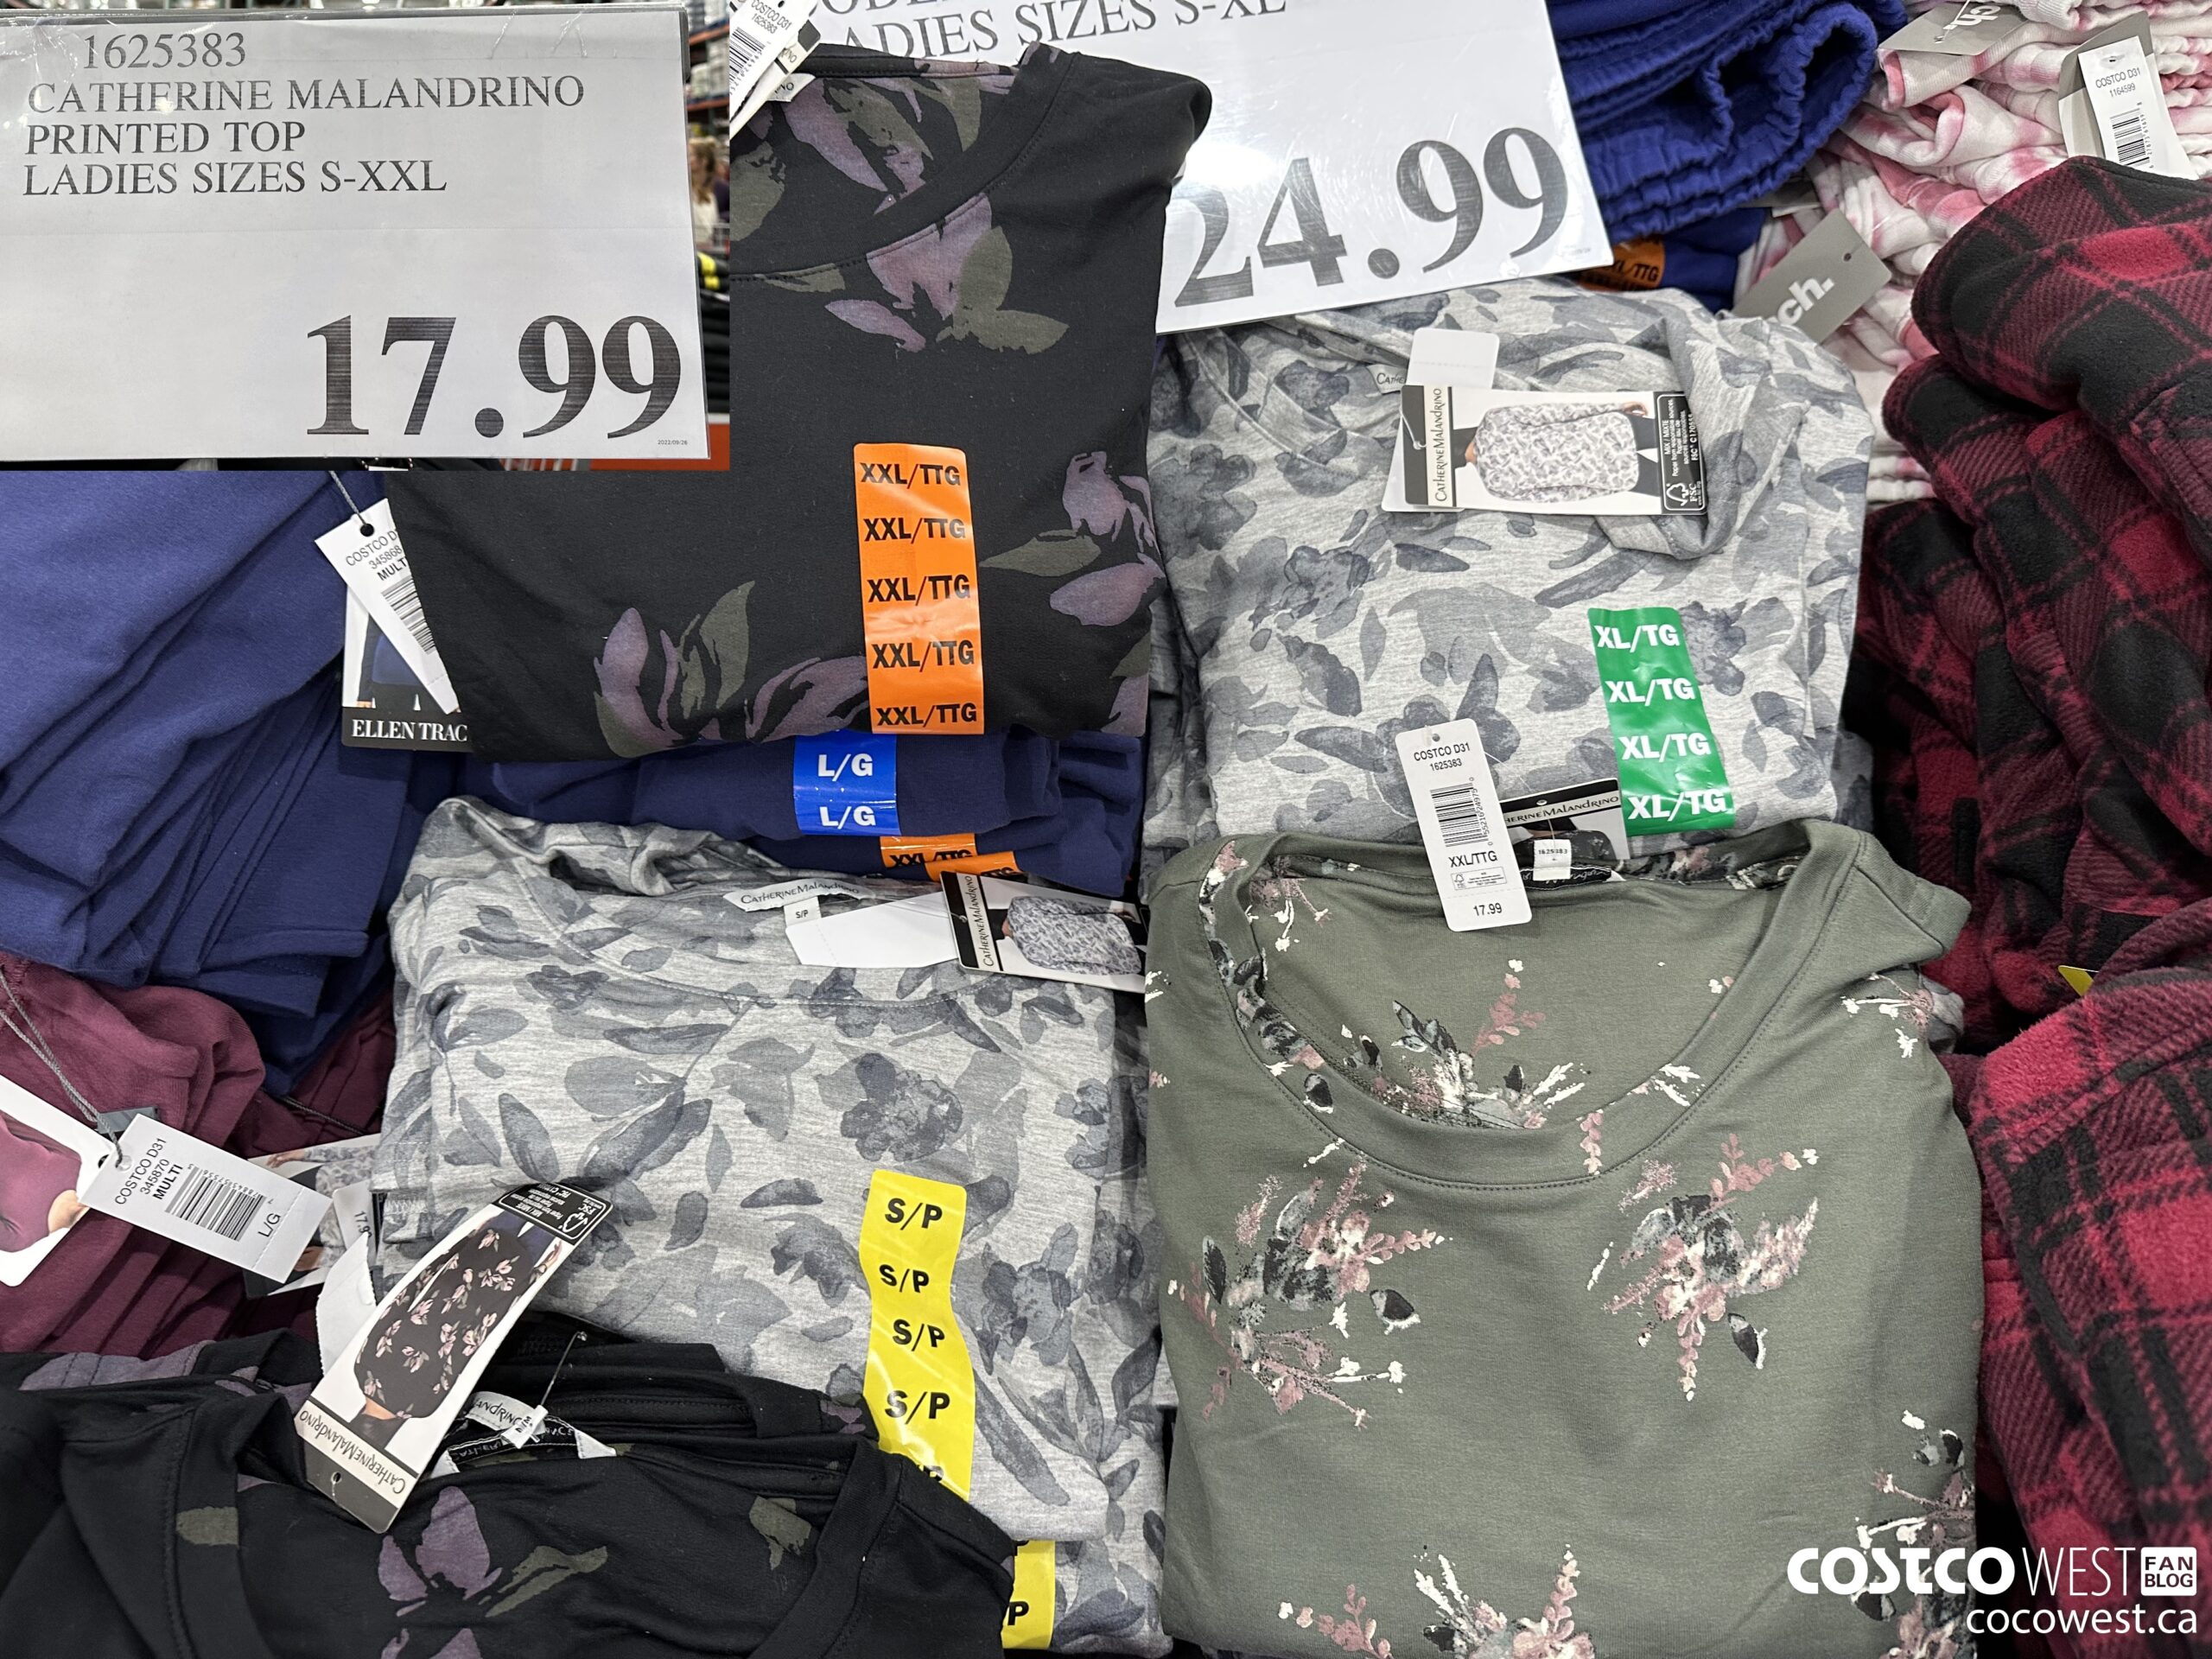 Costco Fall 2022 Superpost – The Entire Clothing Section! - Costco